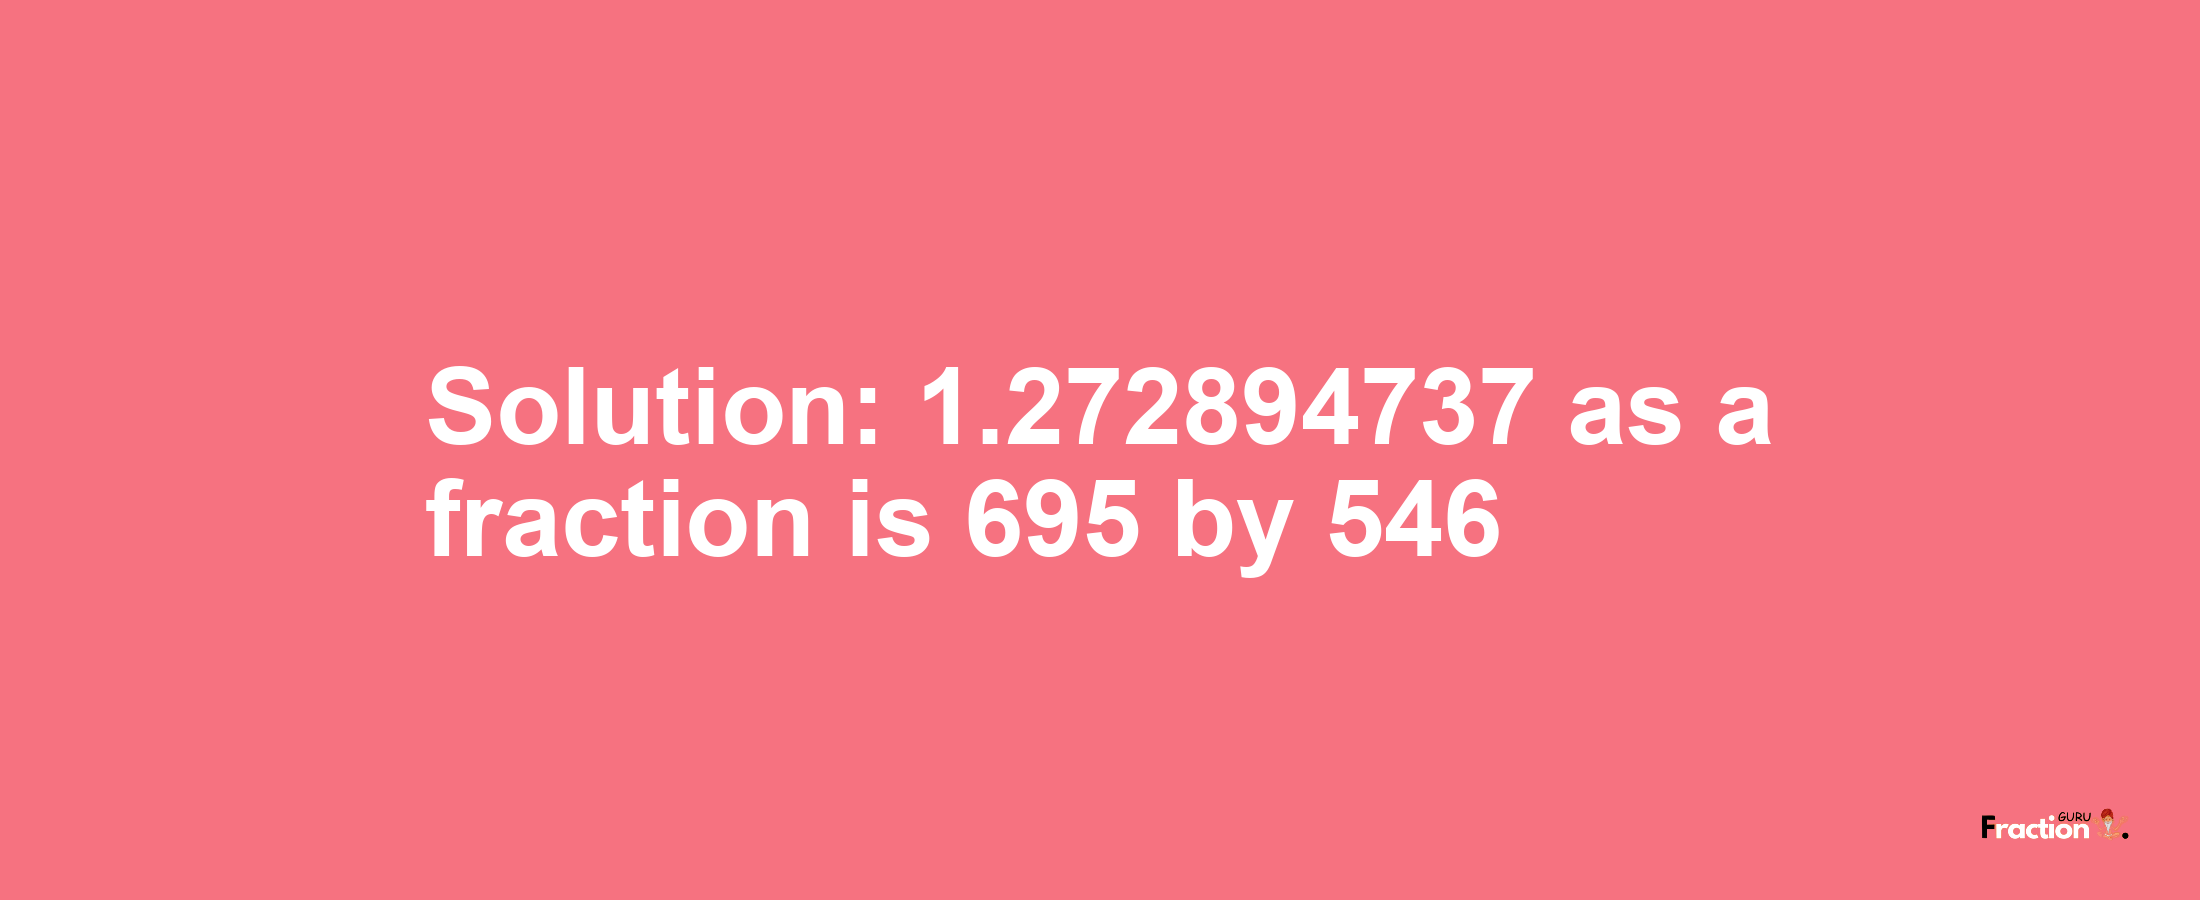 Solution:1.272894737 as a fraction is 695/546